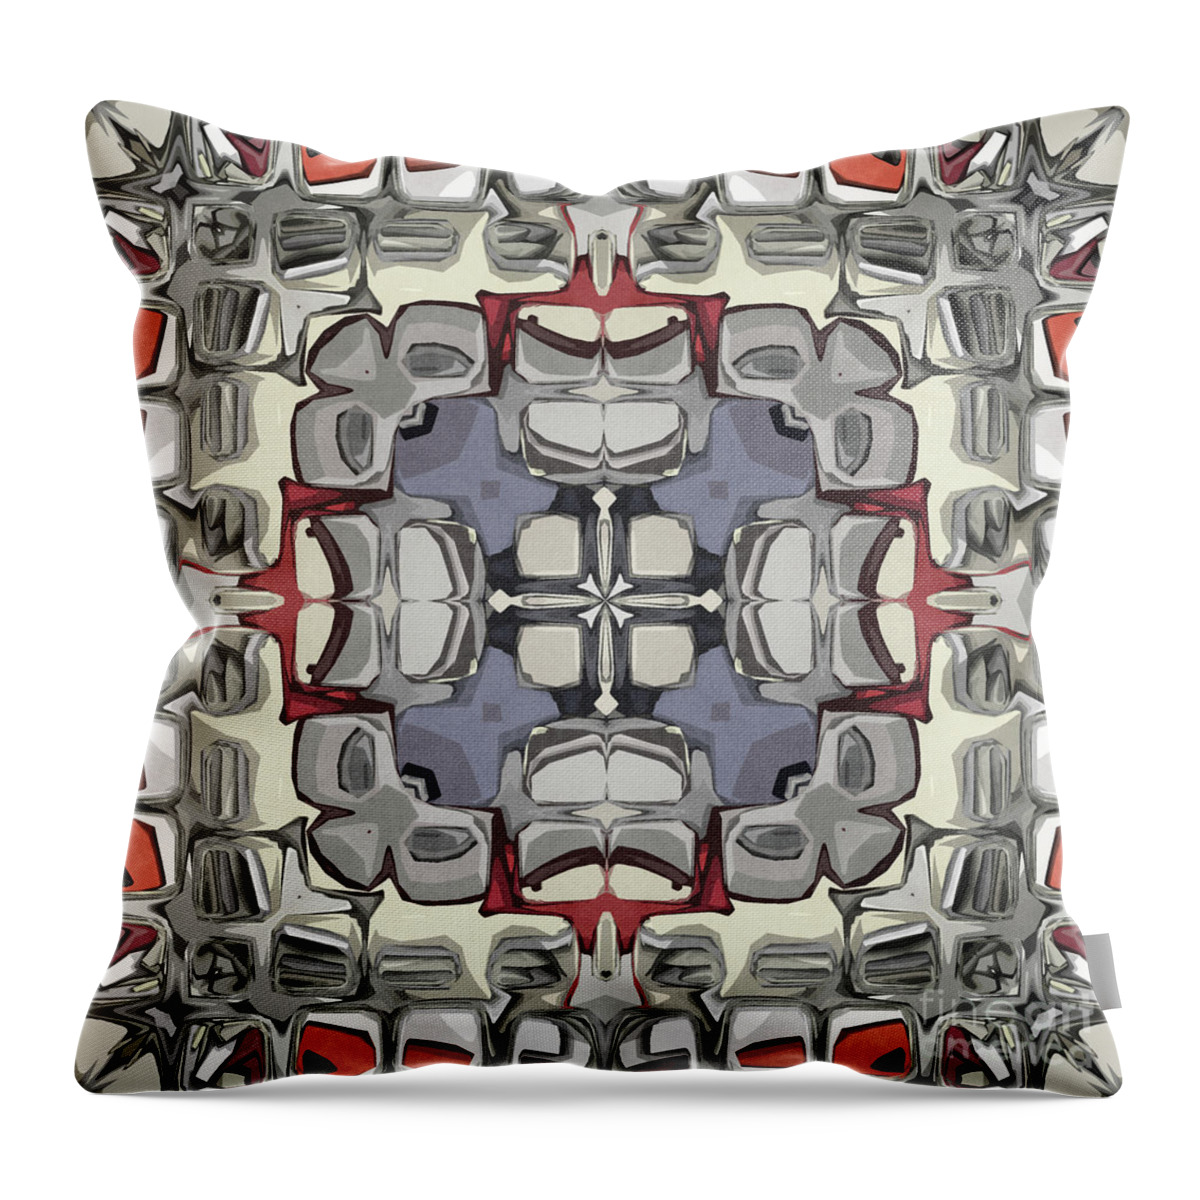 Mandala Throw Pillow featuring the digital art Four Corners of Texture by Phil Perkins